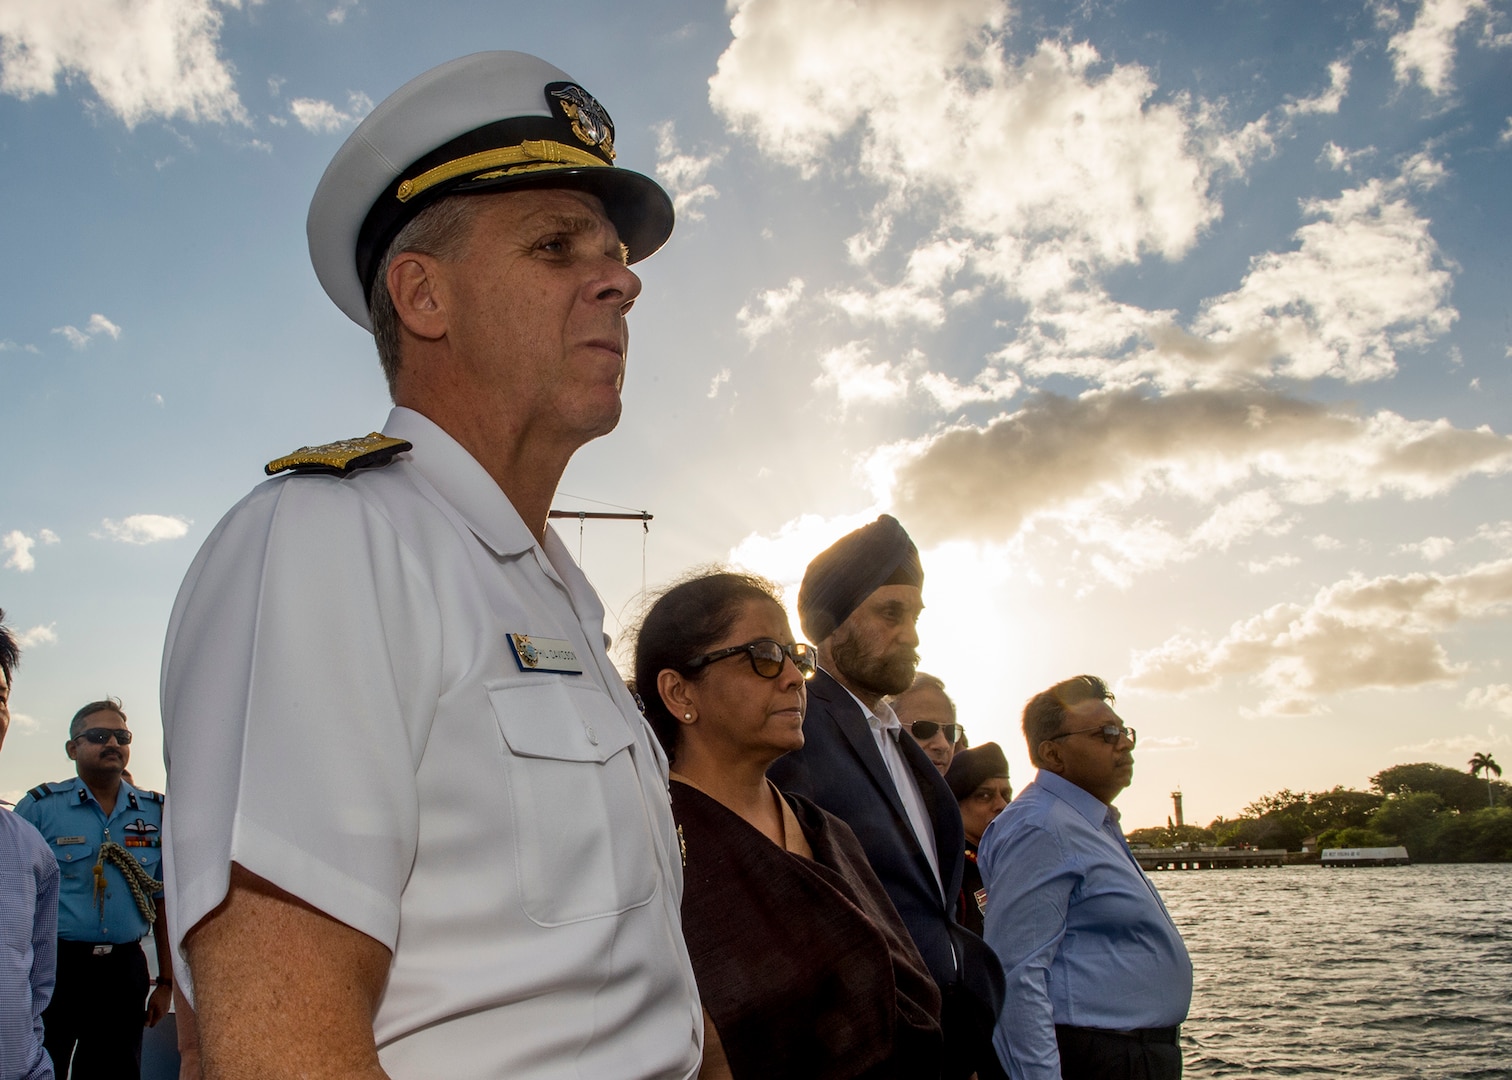 Commander, U.S. Indo-Pacific Command, Adm. Phil Davidson, hosts India’s Minister of Defence, Nirmala Sitharaman, on a barge tour of historic Pearl Harbor. India and the U.S. are global partners in defense and security and are working together to assure a free and open Indo-Pacific.